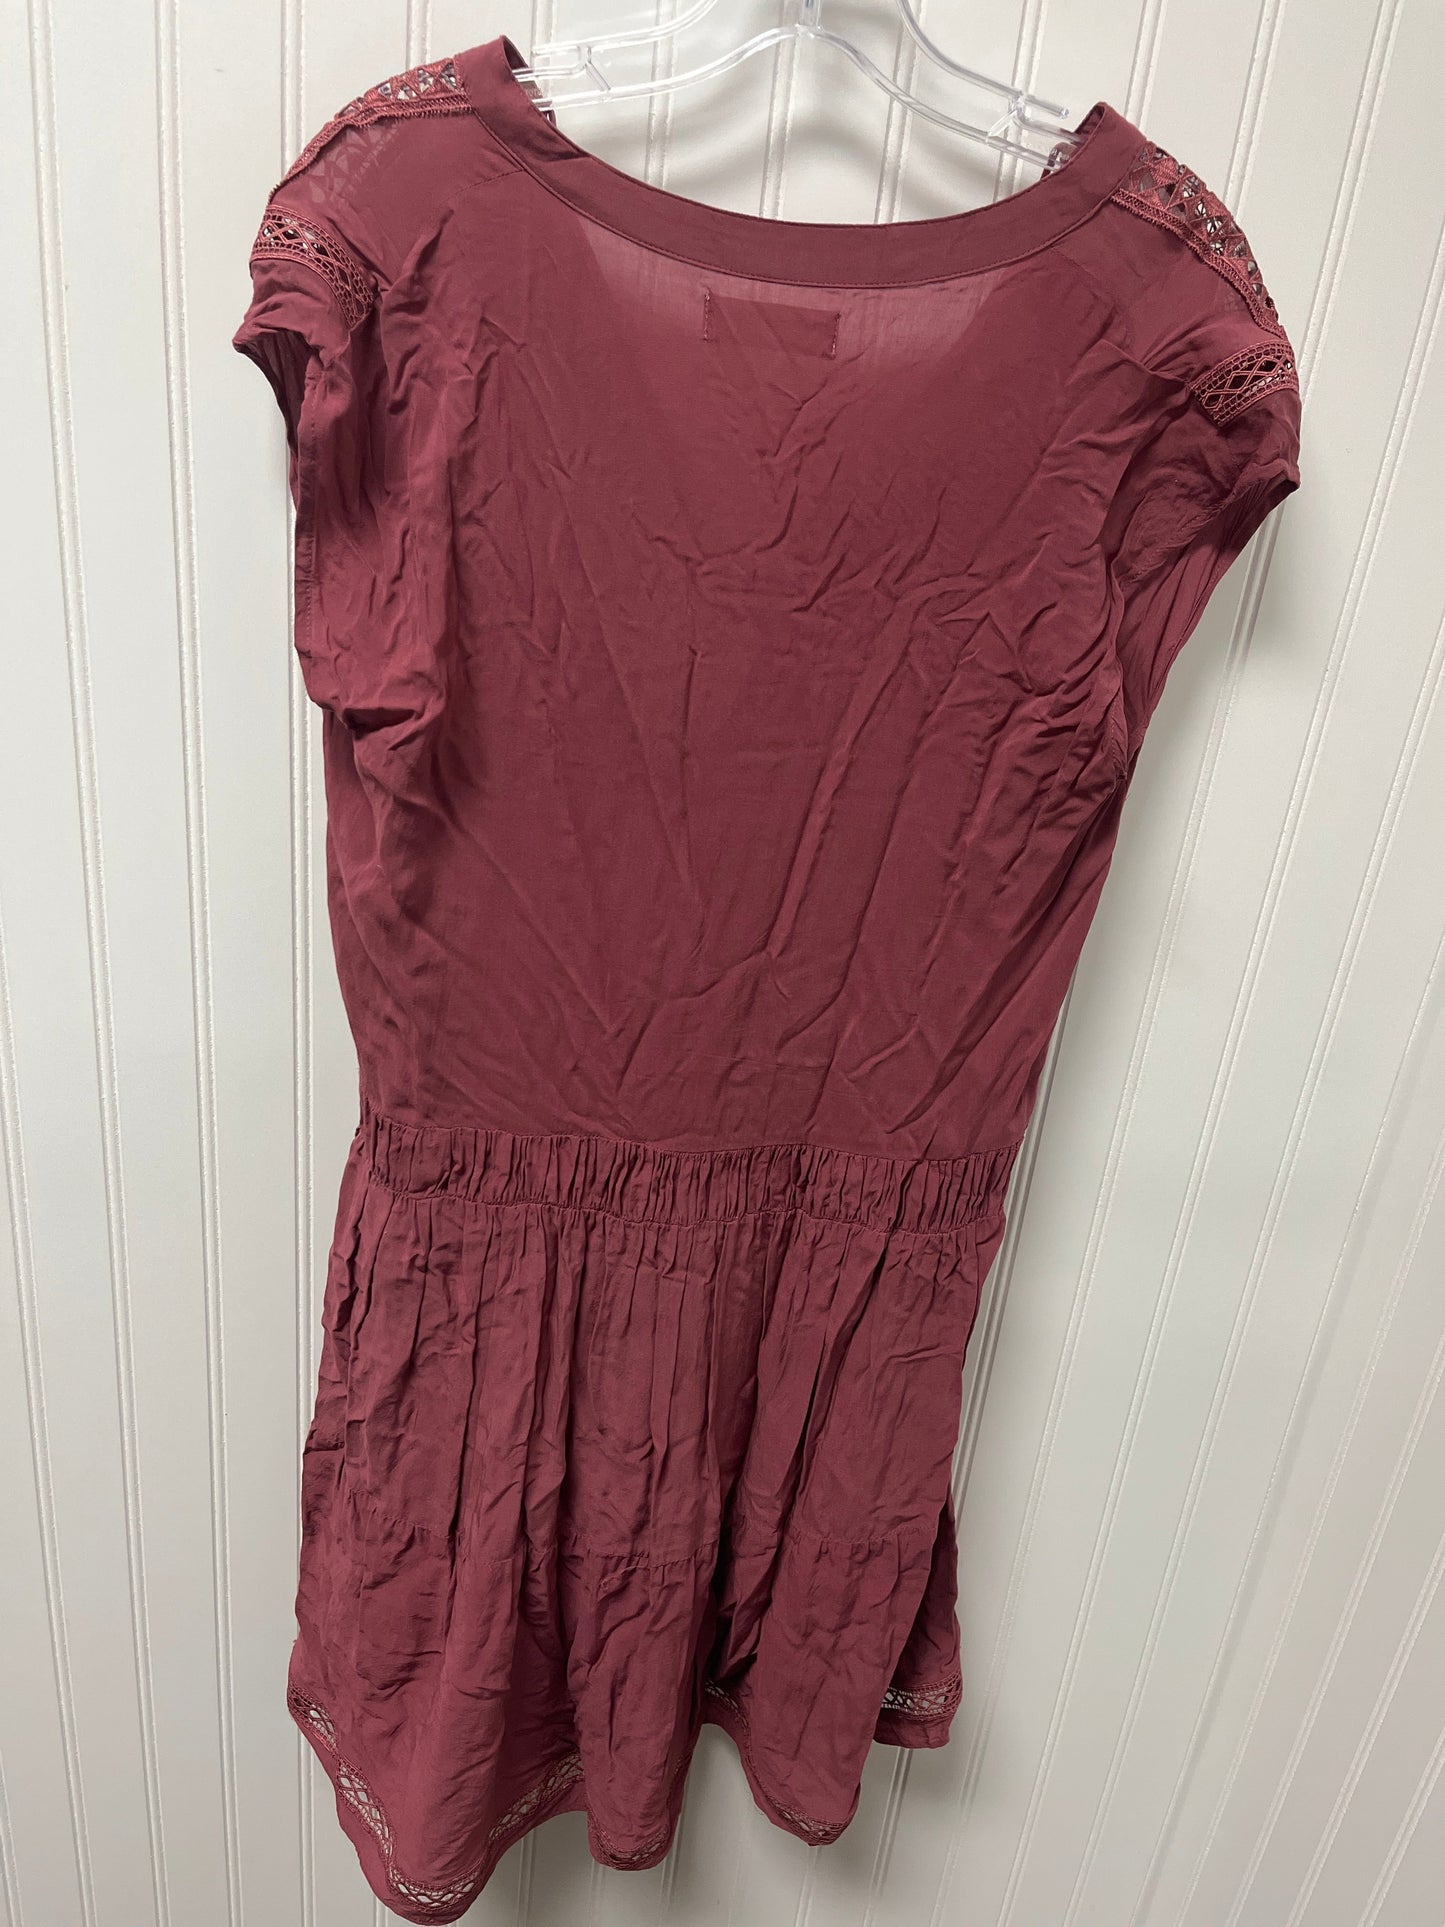 Pink Dress Casual Short Lucky Brand, Size S